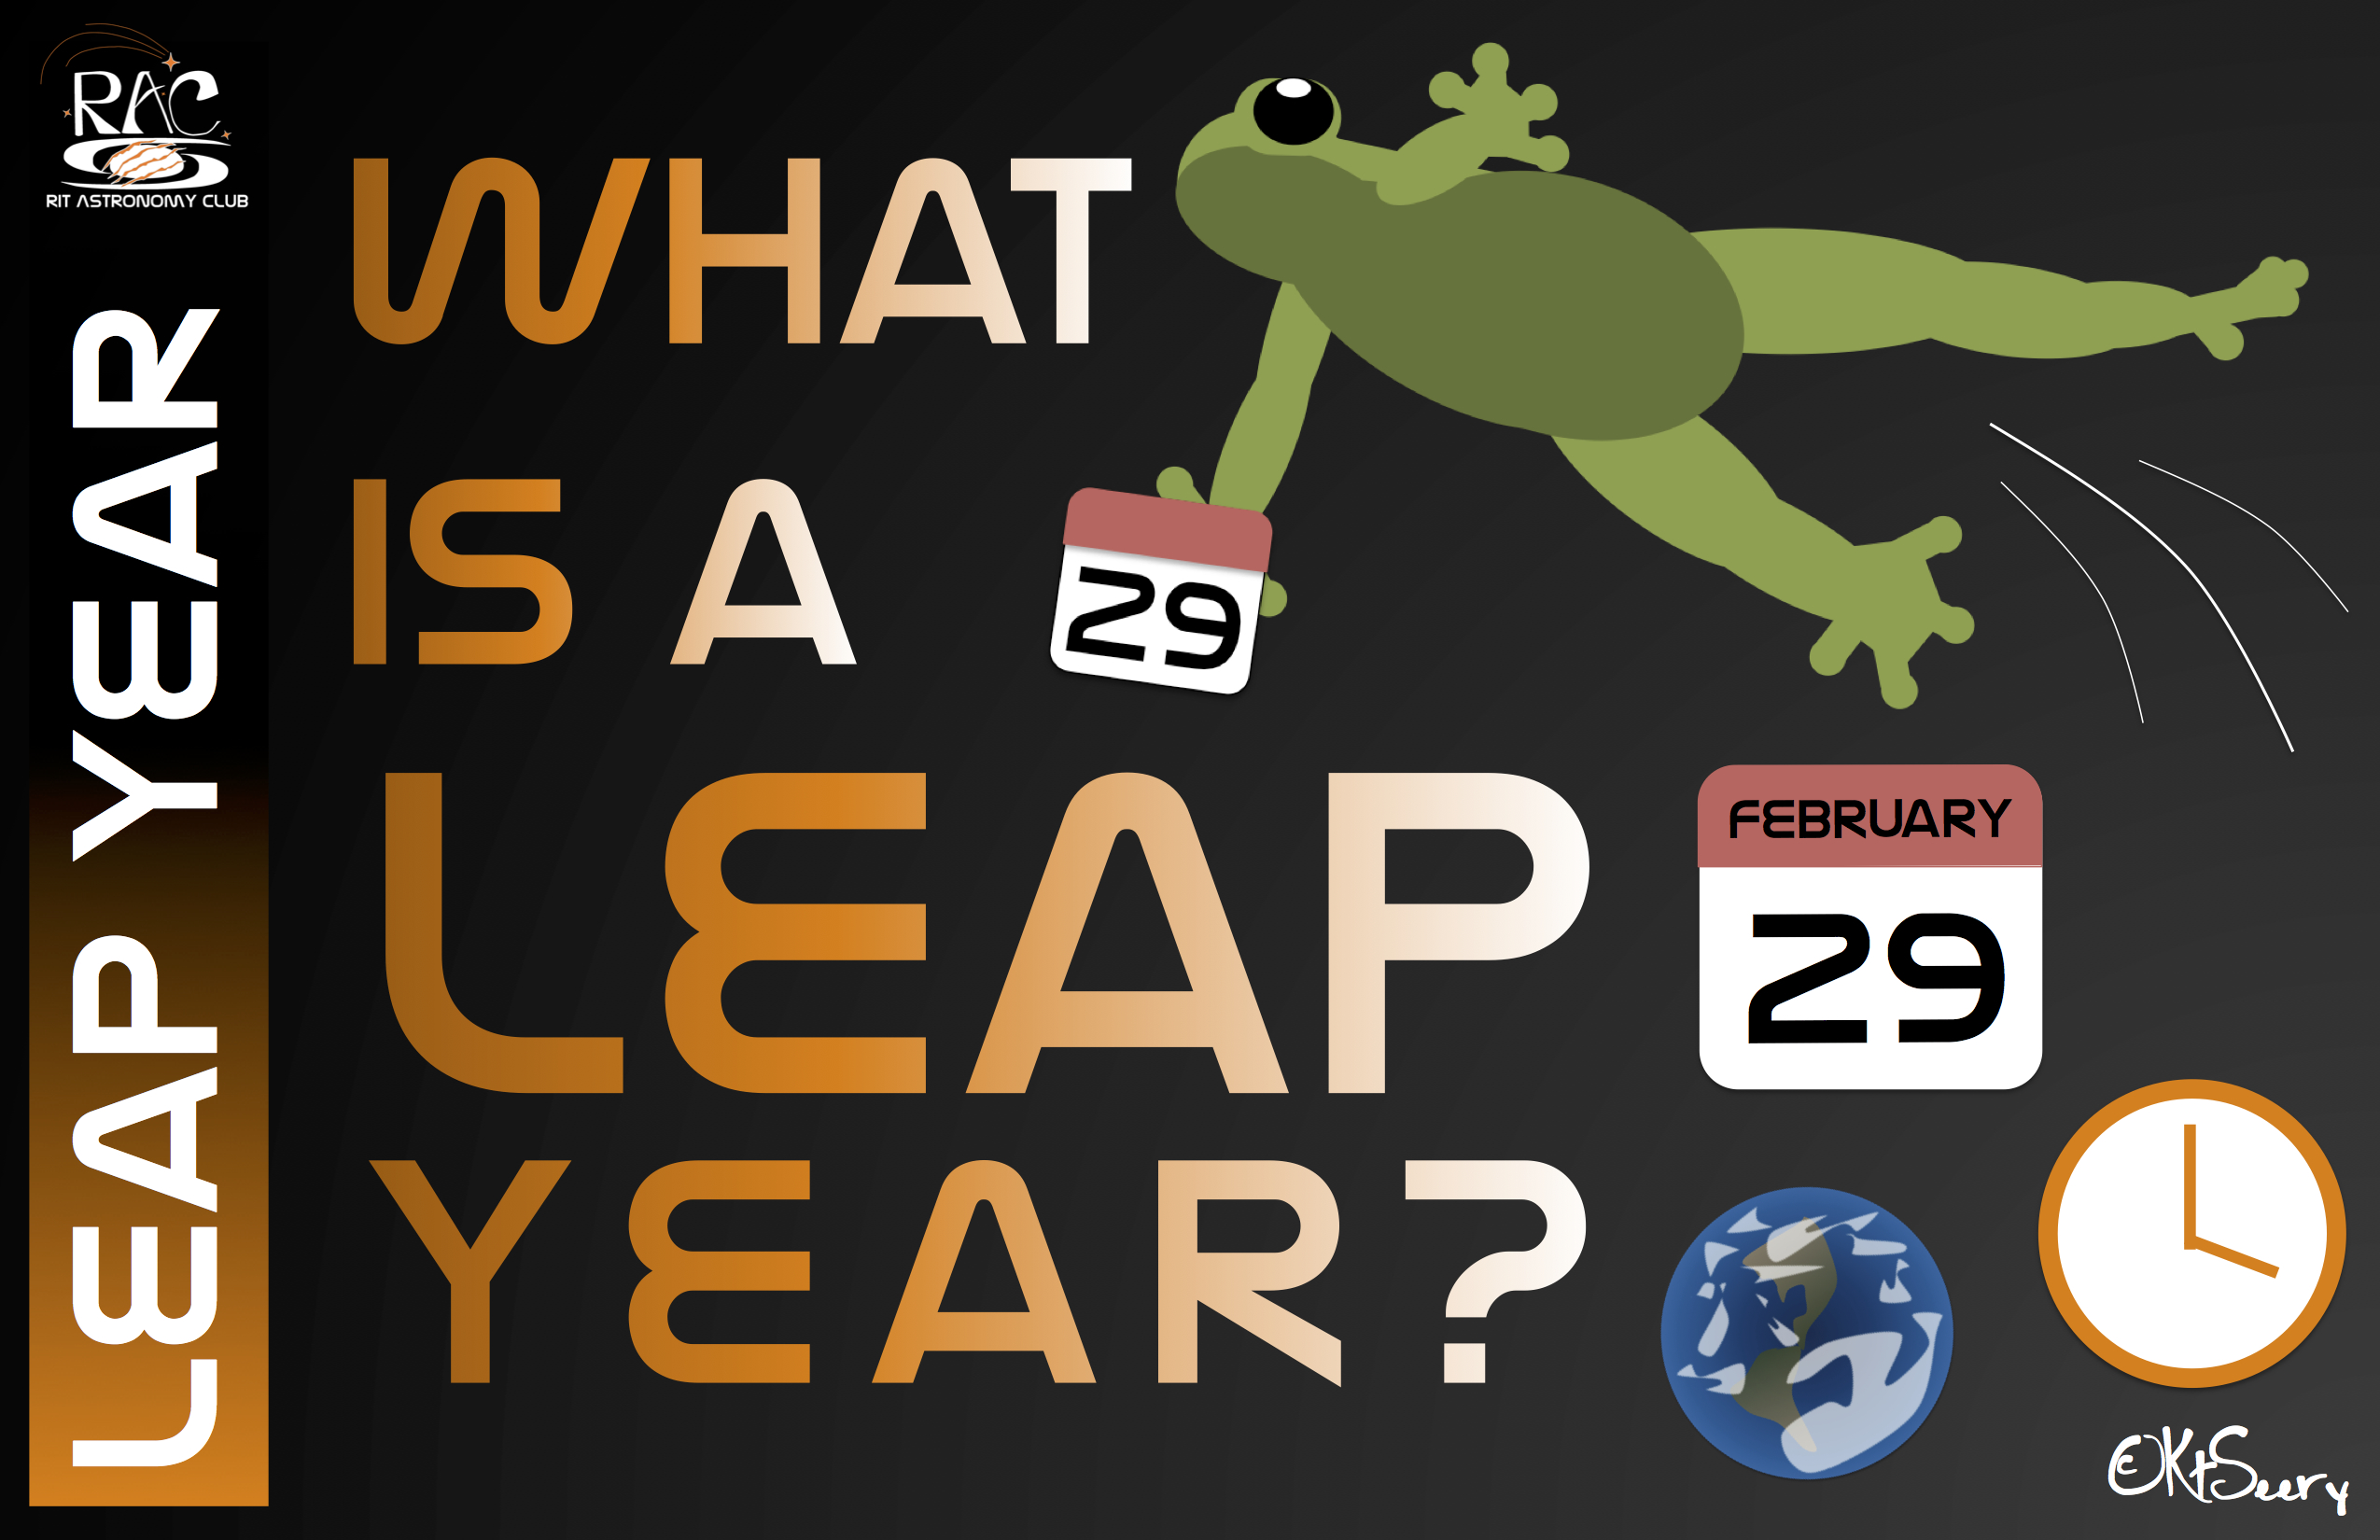 Leap Years. What are they and why do we do it? CosmoQuest